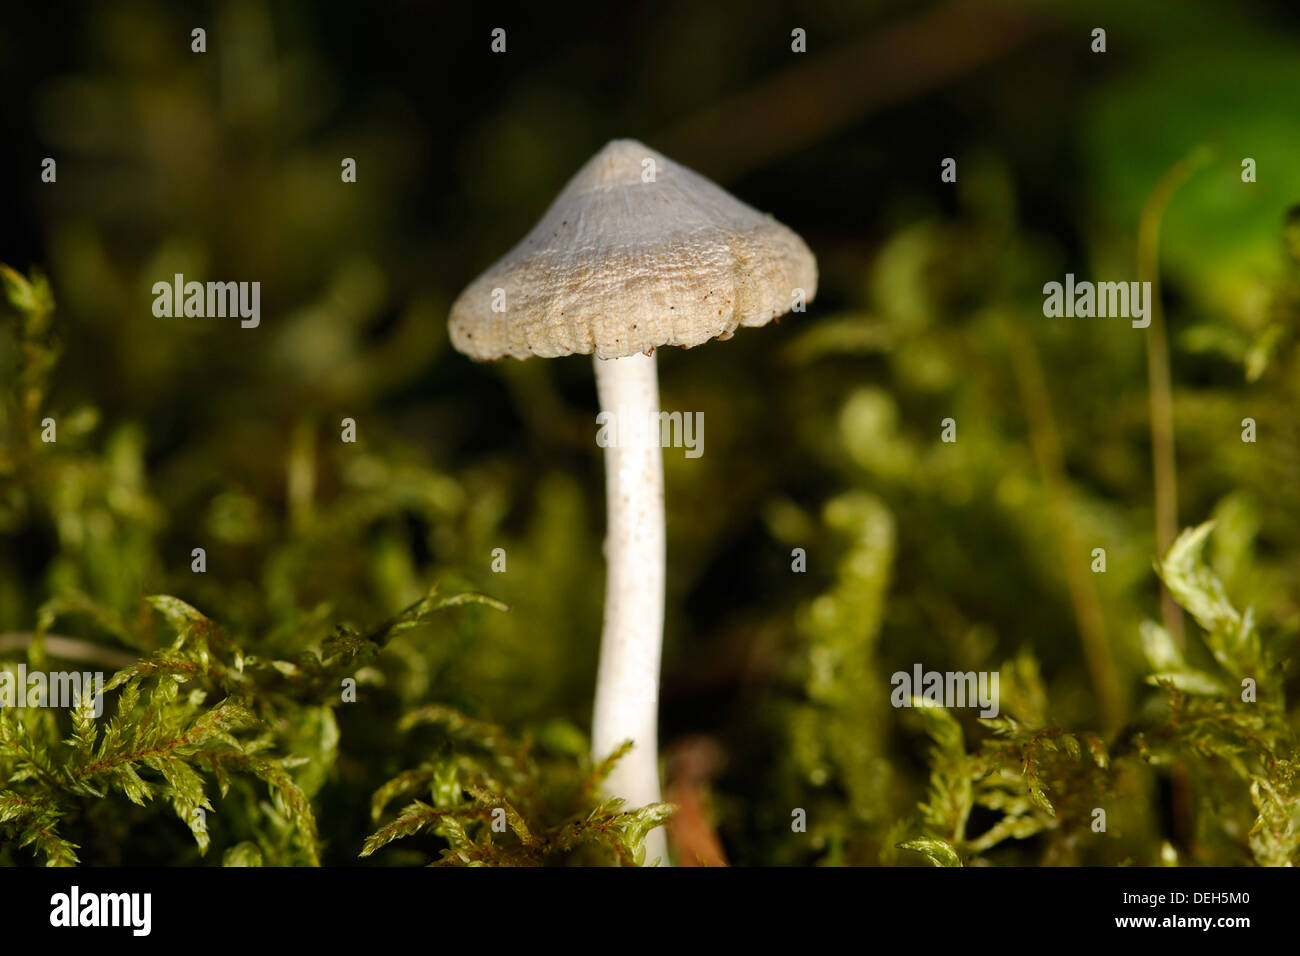 Tiny uneatable mushroom growing in the forest Stock Photo